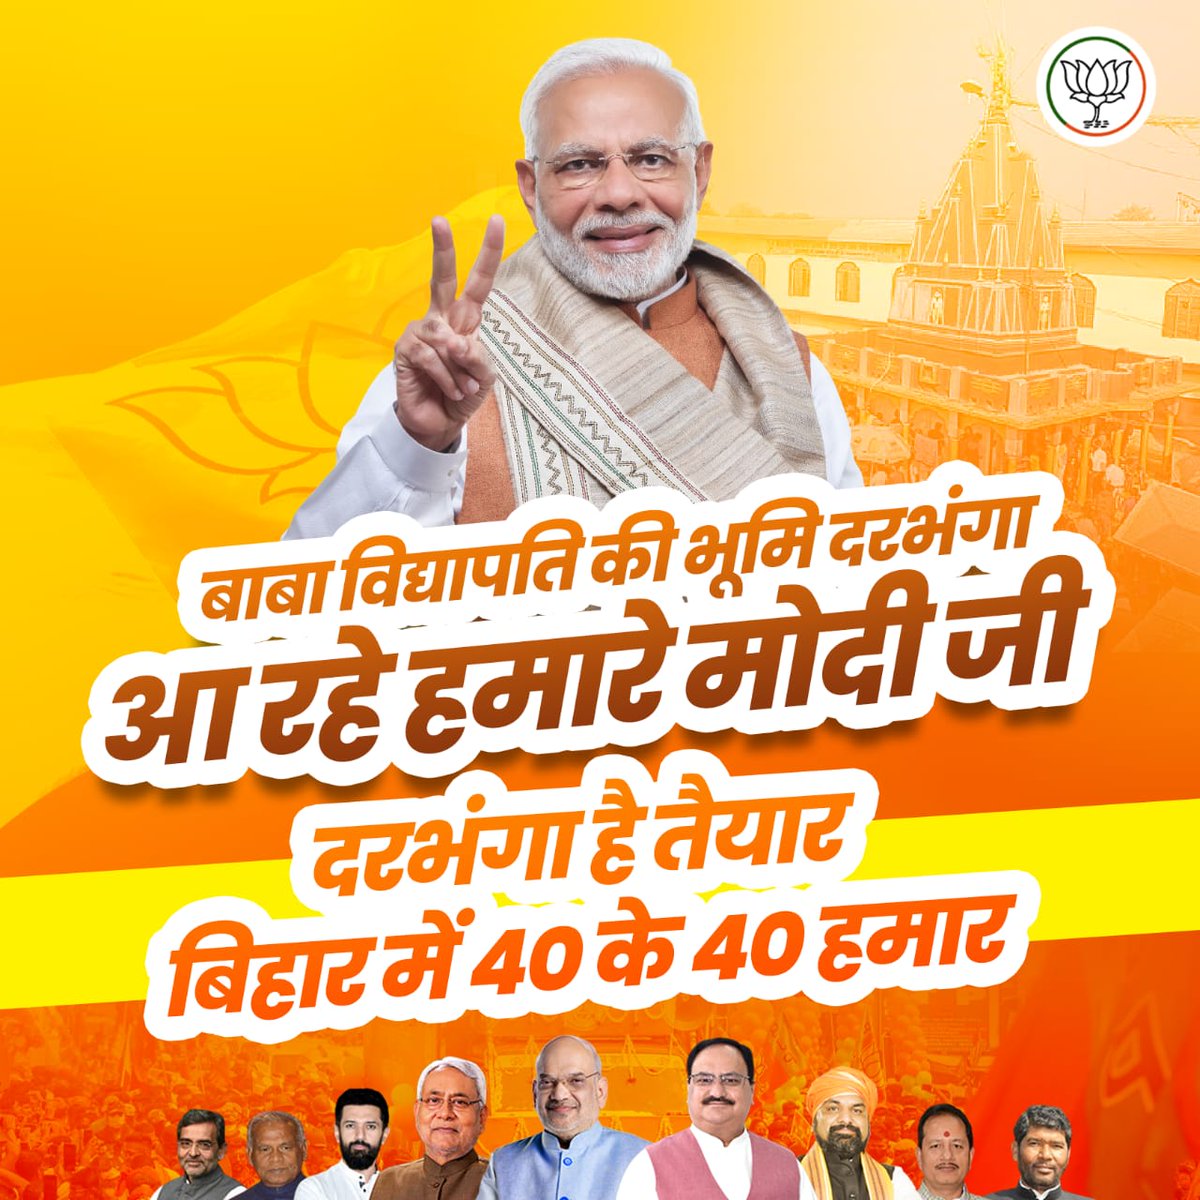 PM Modi ji has provided relief to 4,93,062 mothers and sisters from smoke in Darbhanga. Also, over 2 lakh farmers have benefited from the honorarium fund. Darbhanga calls out, once again Modi government!
#BihariwithModiji